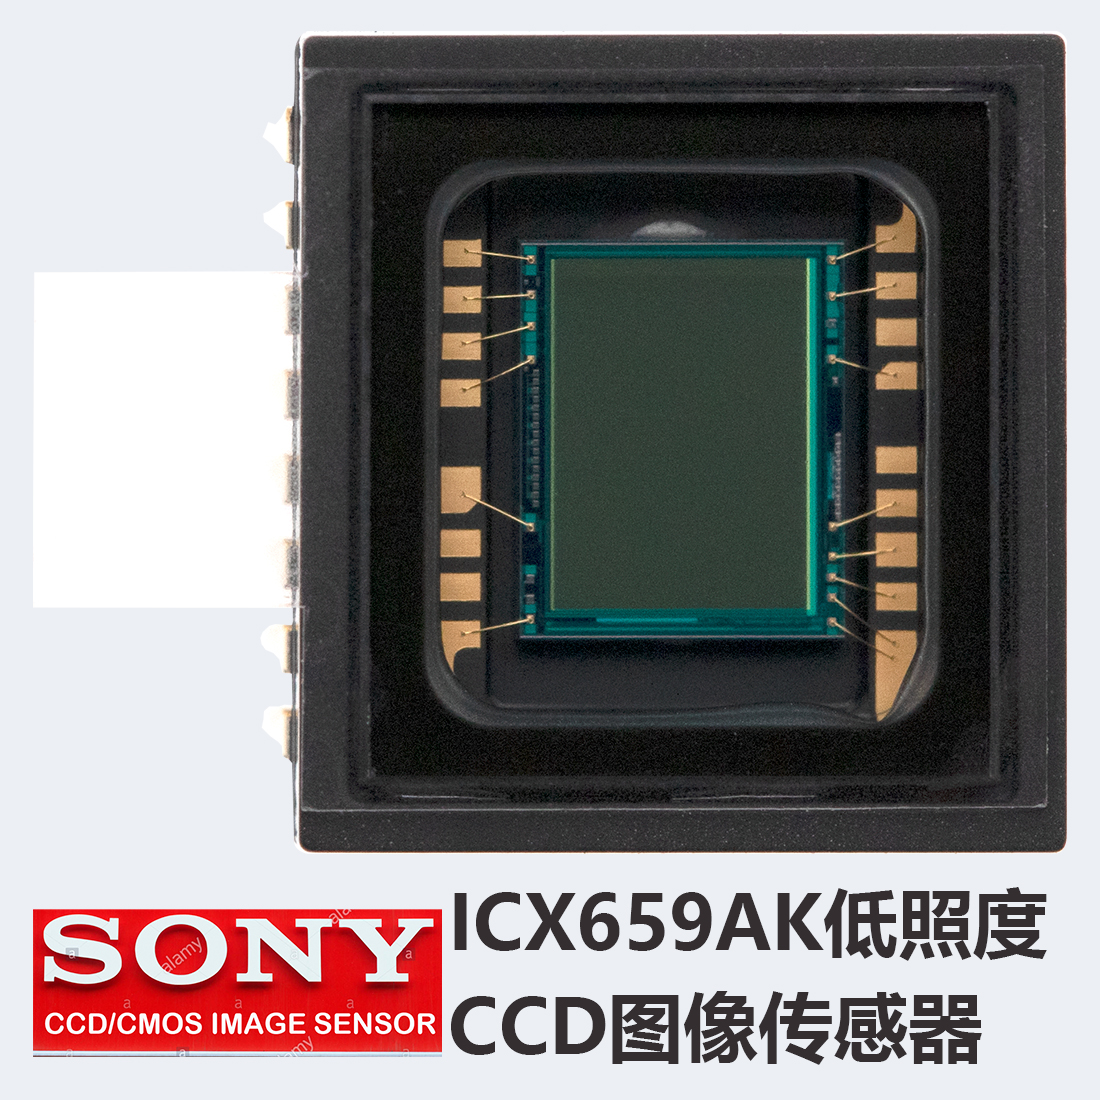 ICX659AKA, SONY HAD CCD 1/3 , image CCD sensor, high resolution, low illumination, PAL system, for color security 